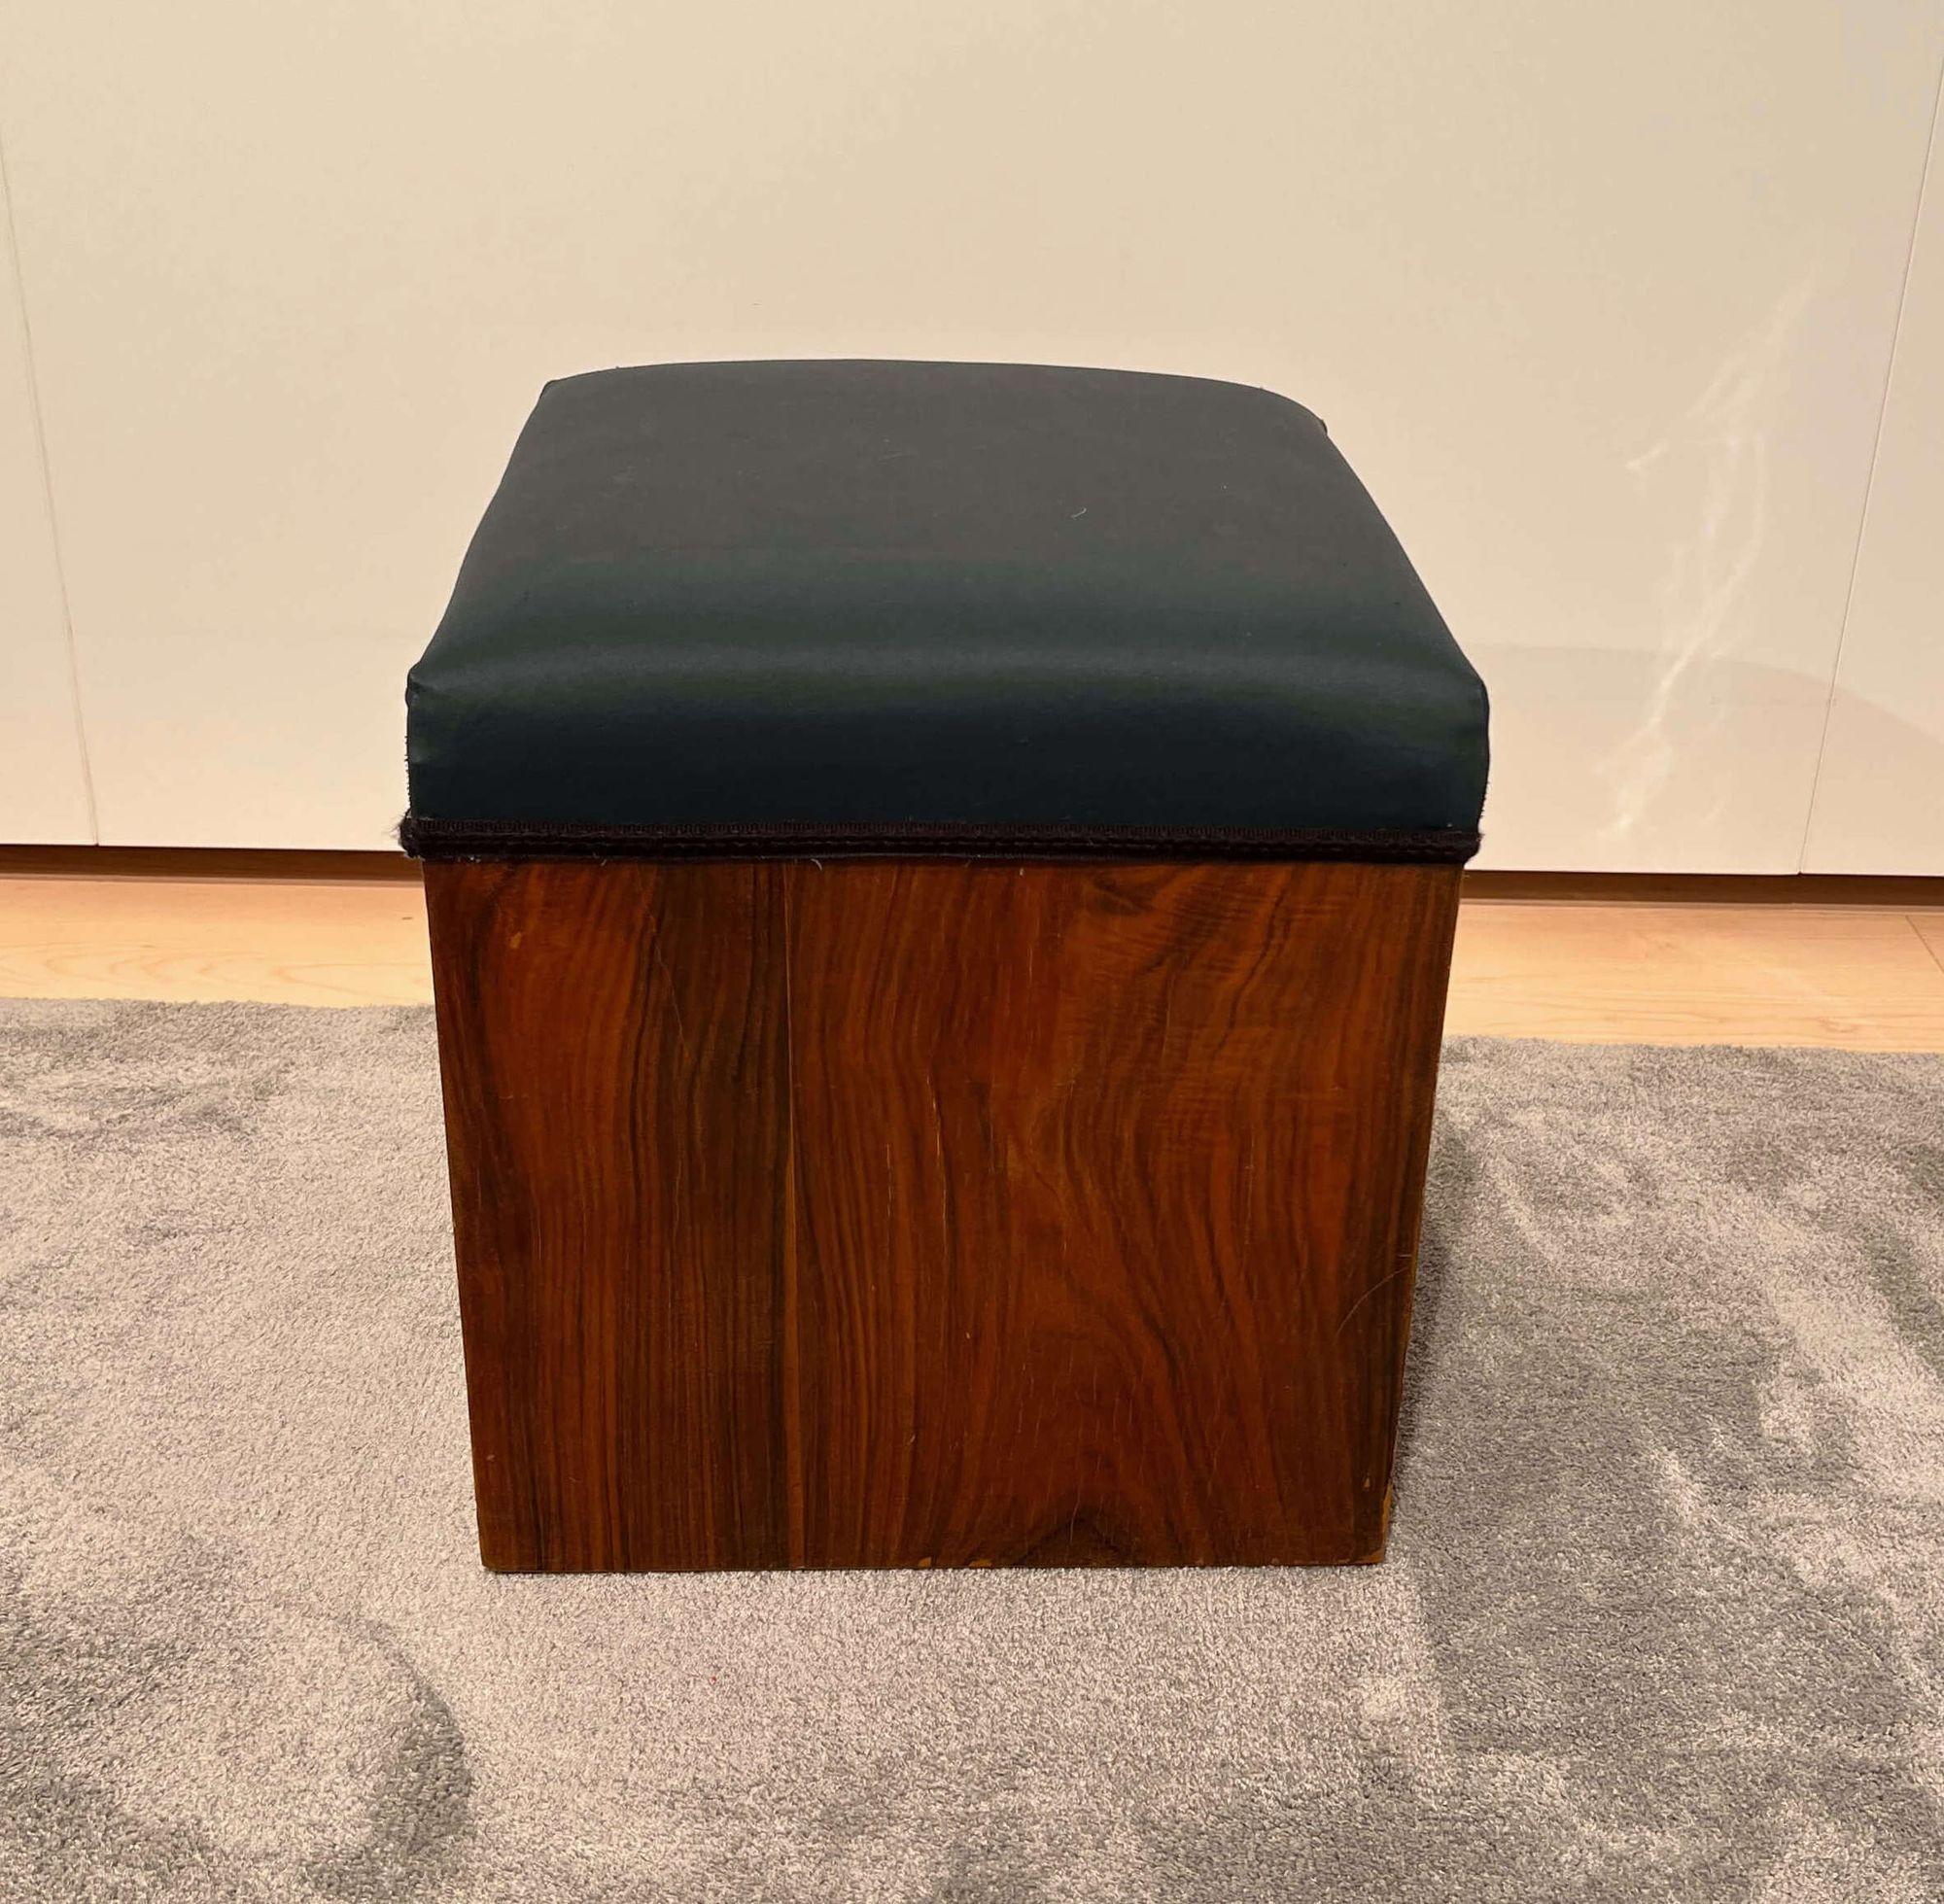 Beautiful original Art Deco stool from France about 1930.
Walnut veneered and polished. Covered with anthracite fabric and border finishing.
Dimensions: H 38 cm x W 36 cm x D 37 cm.